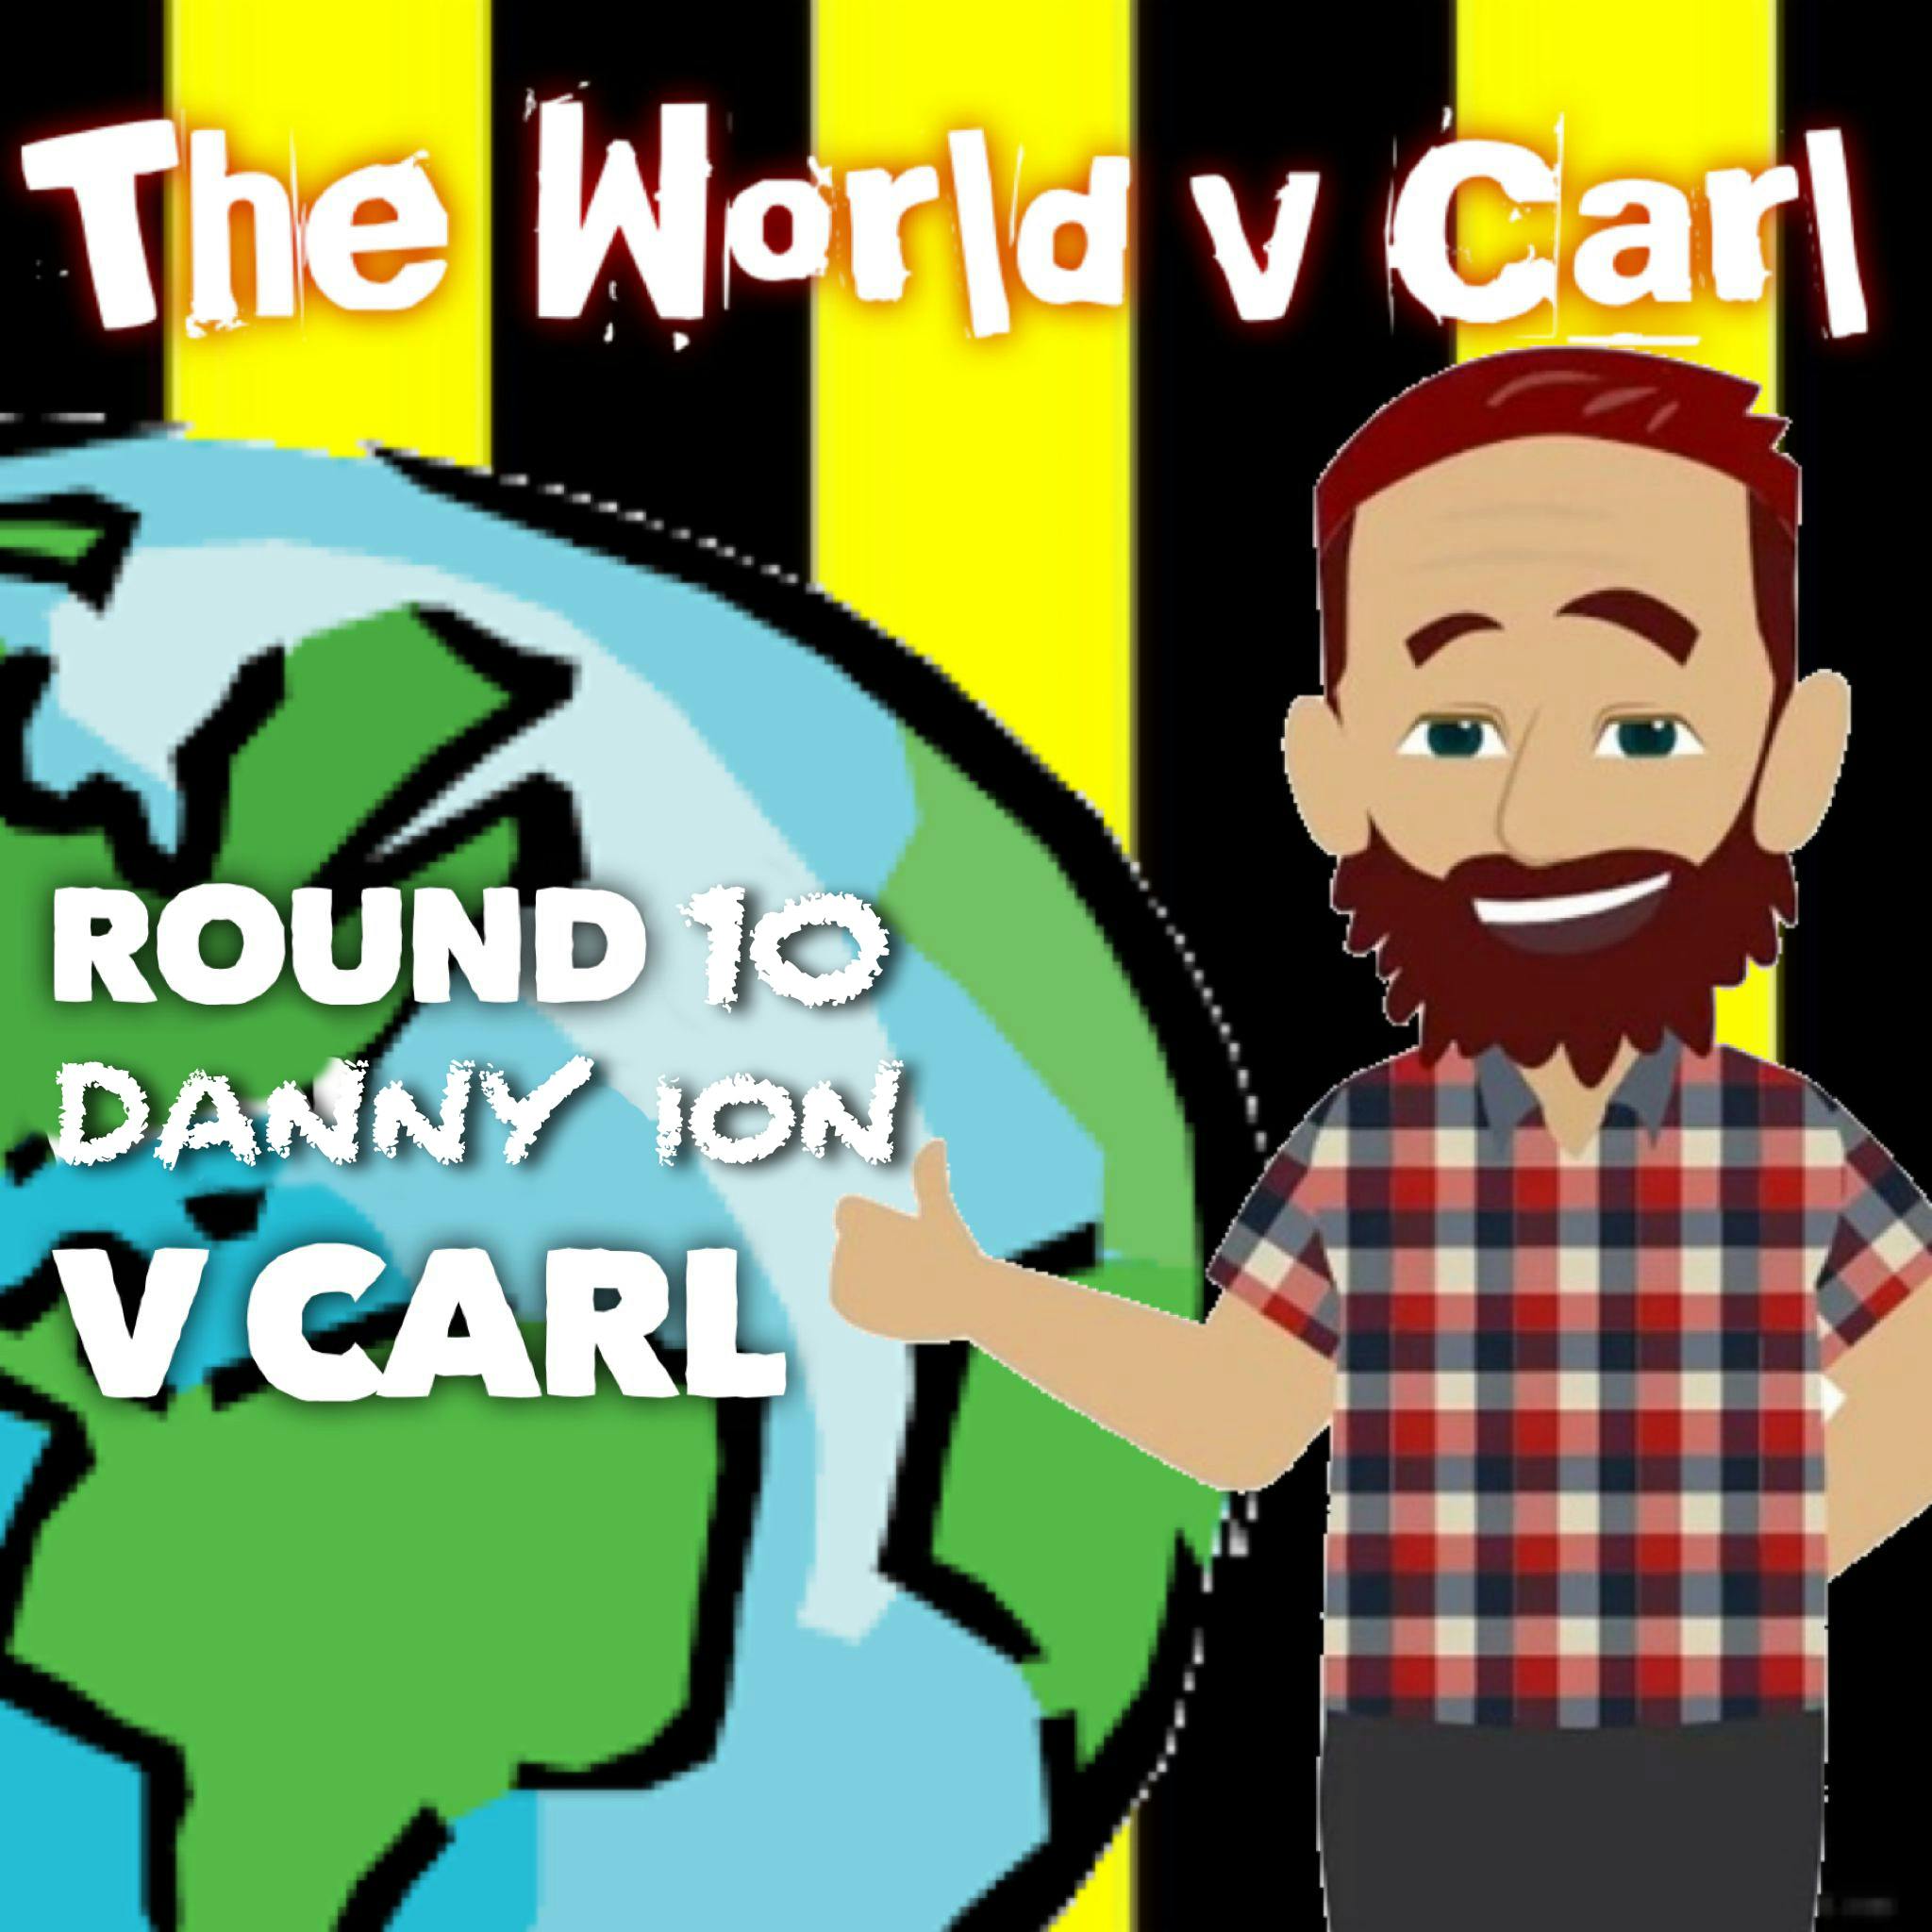 The World v Carl - Round 10 (Danny Ion) - NSFW